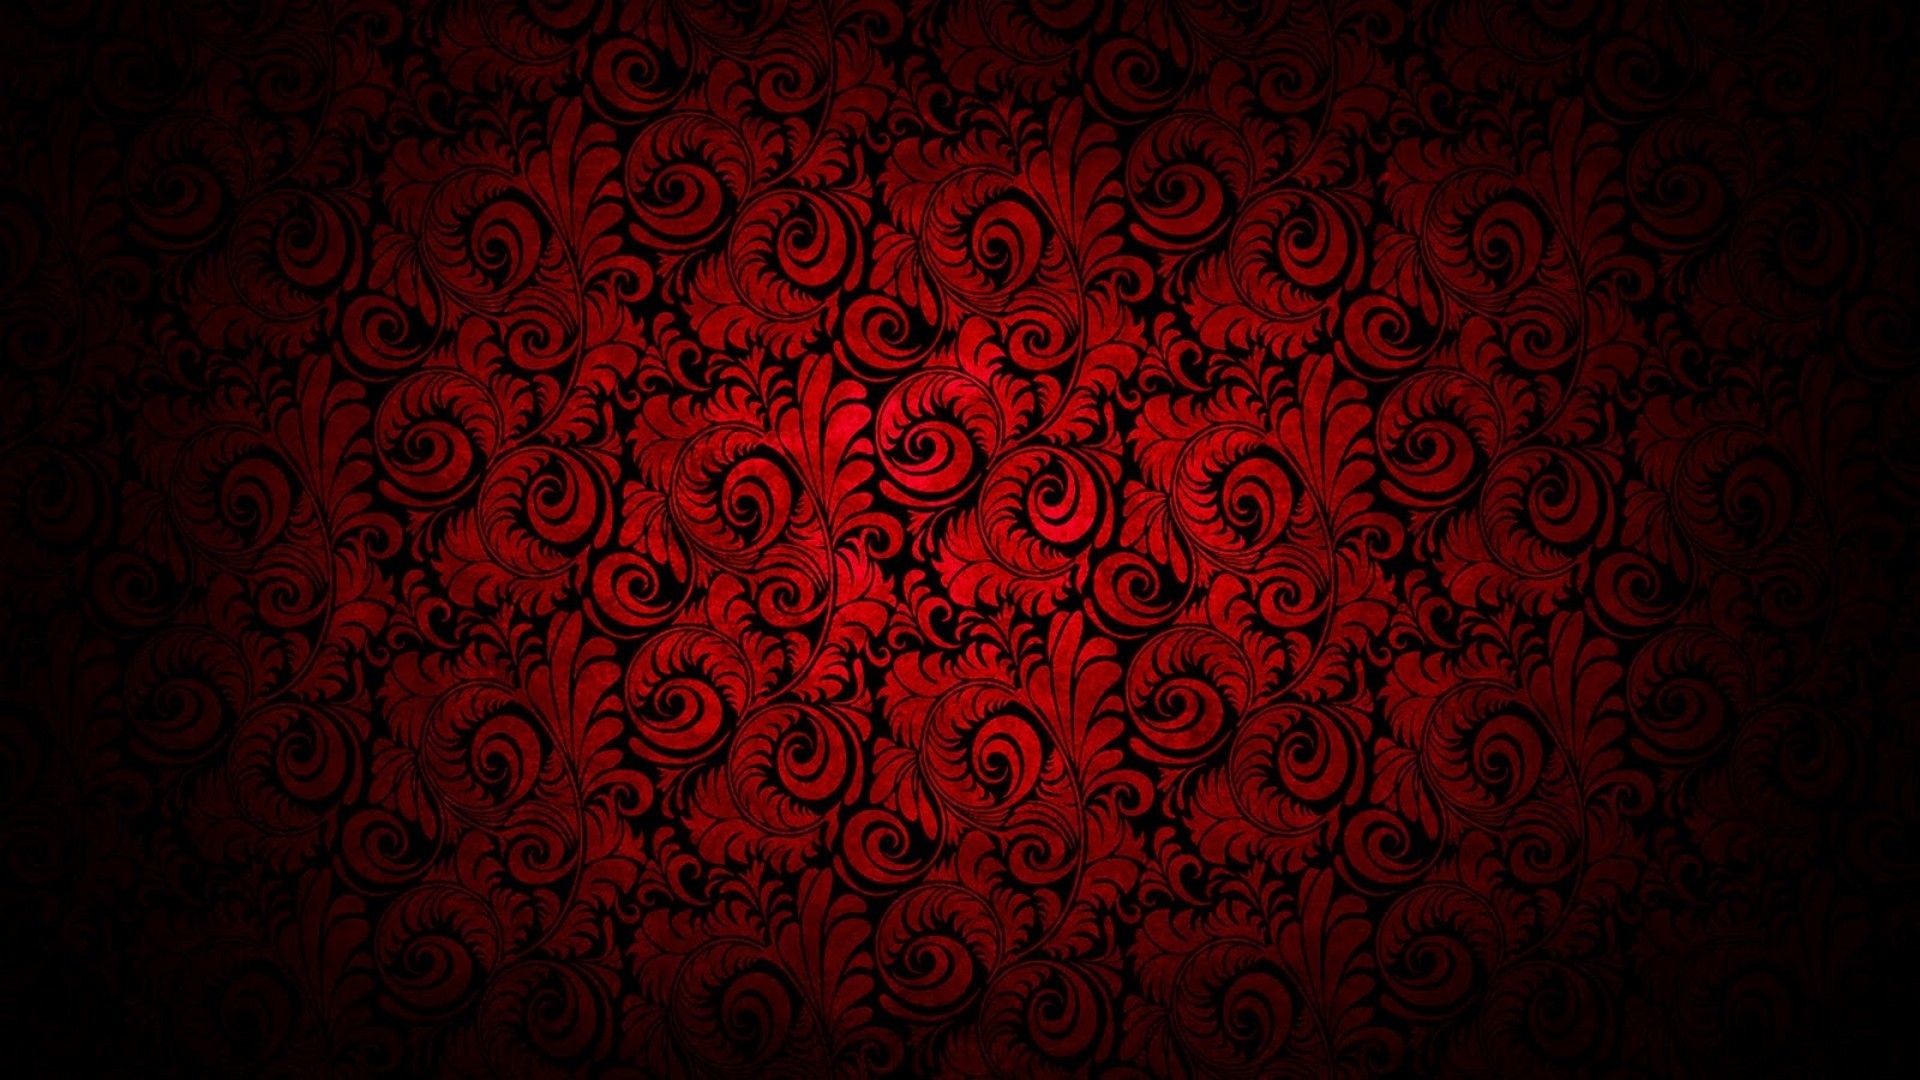 1920x1080 Flower Background Hd Red And Black Wallpapers | HDWallpaperfreebie